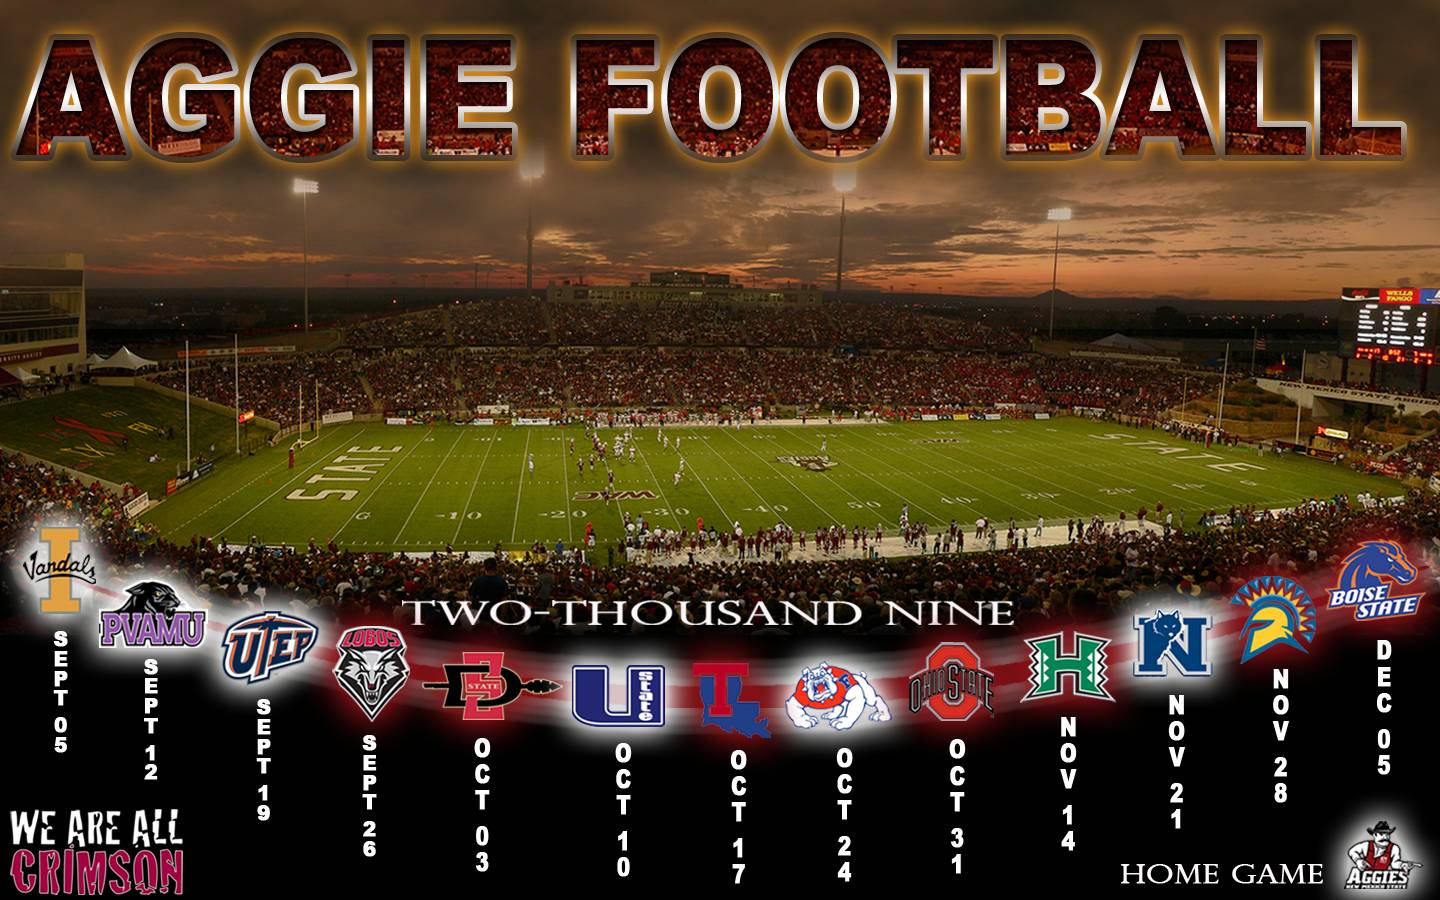 HD Wallpaper Background Fb Aggie Football For Desktop By